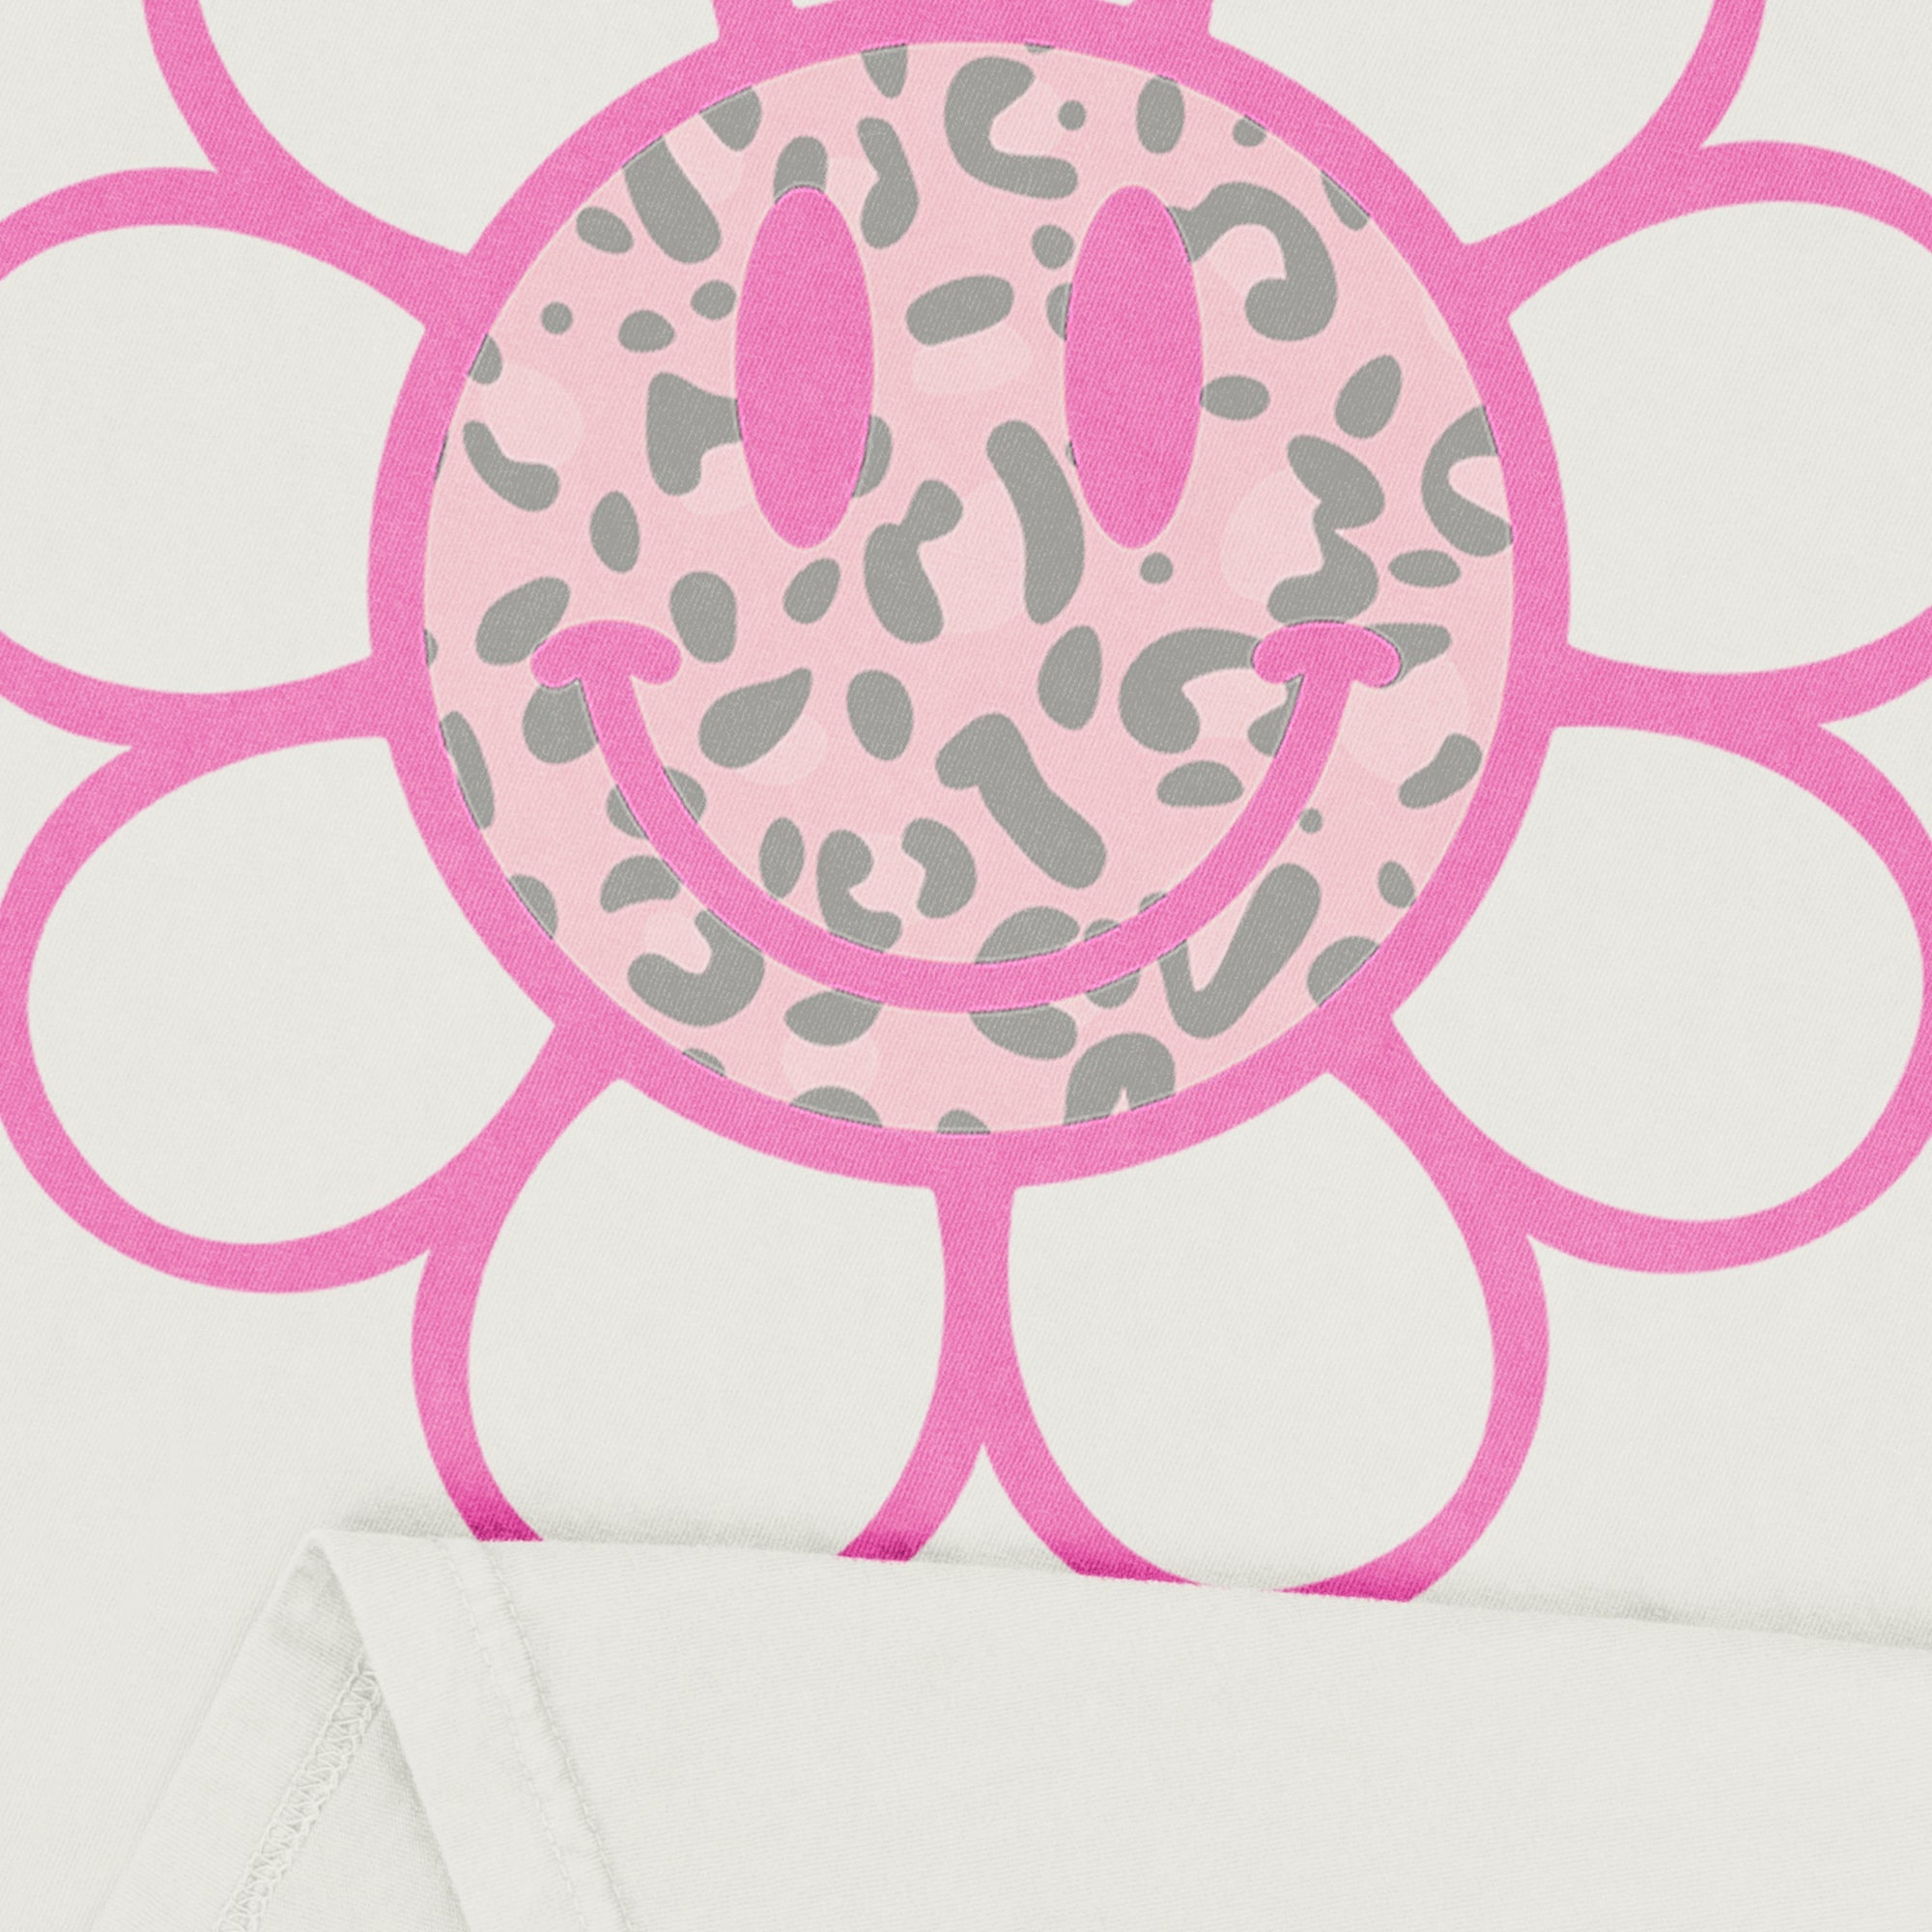 Leopard Daisy Smiley Garment-Dyed Tee - Stories You Can Wear